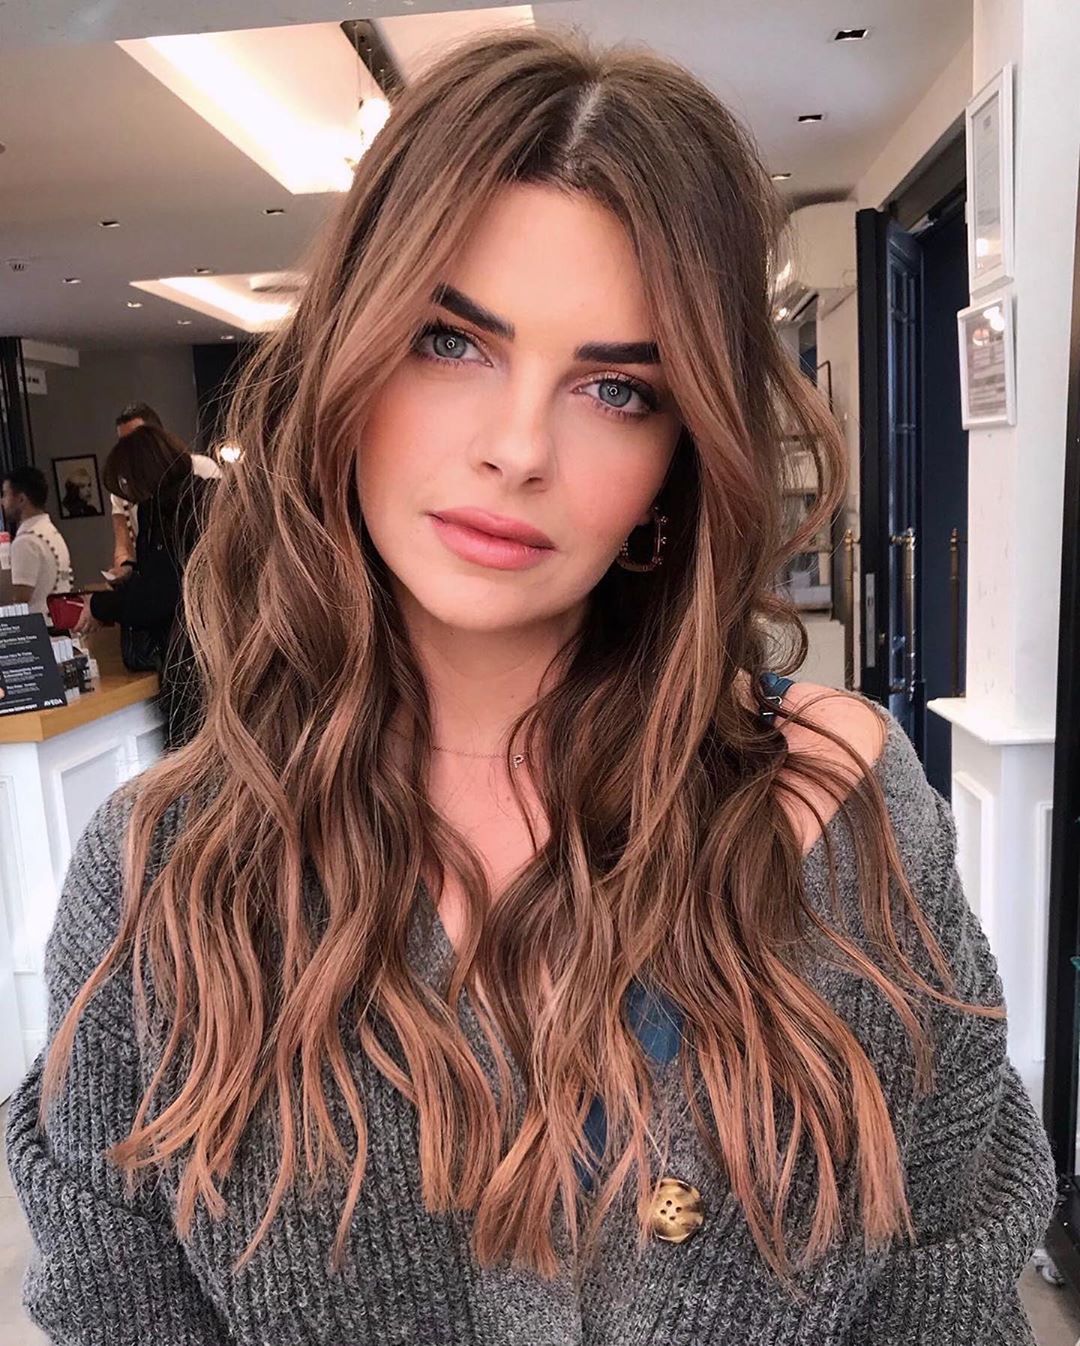 Female Long Hairstyles with Color Trends - Women Long Hair Styles and Haircuts in 2021